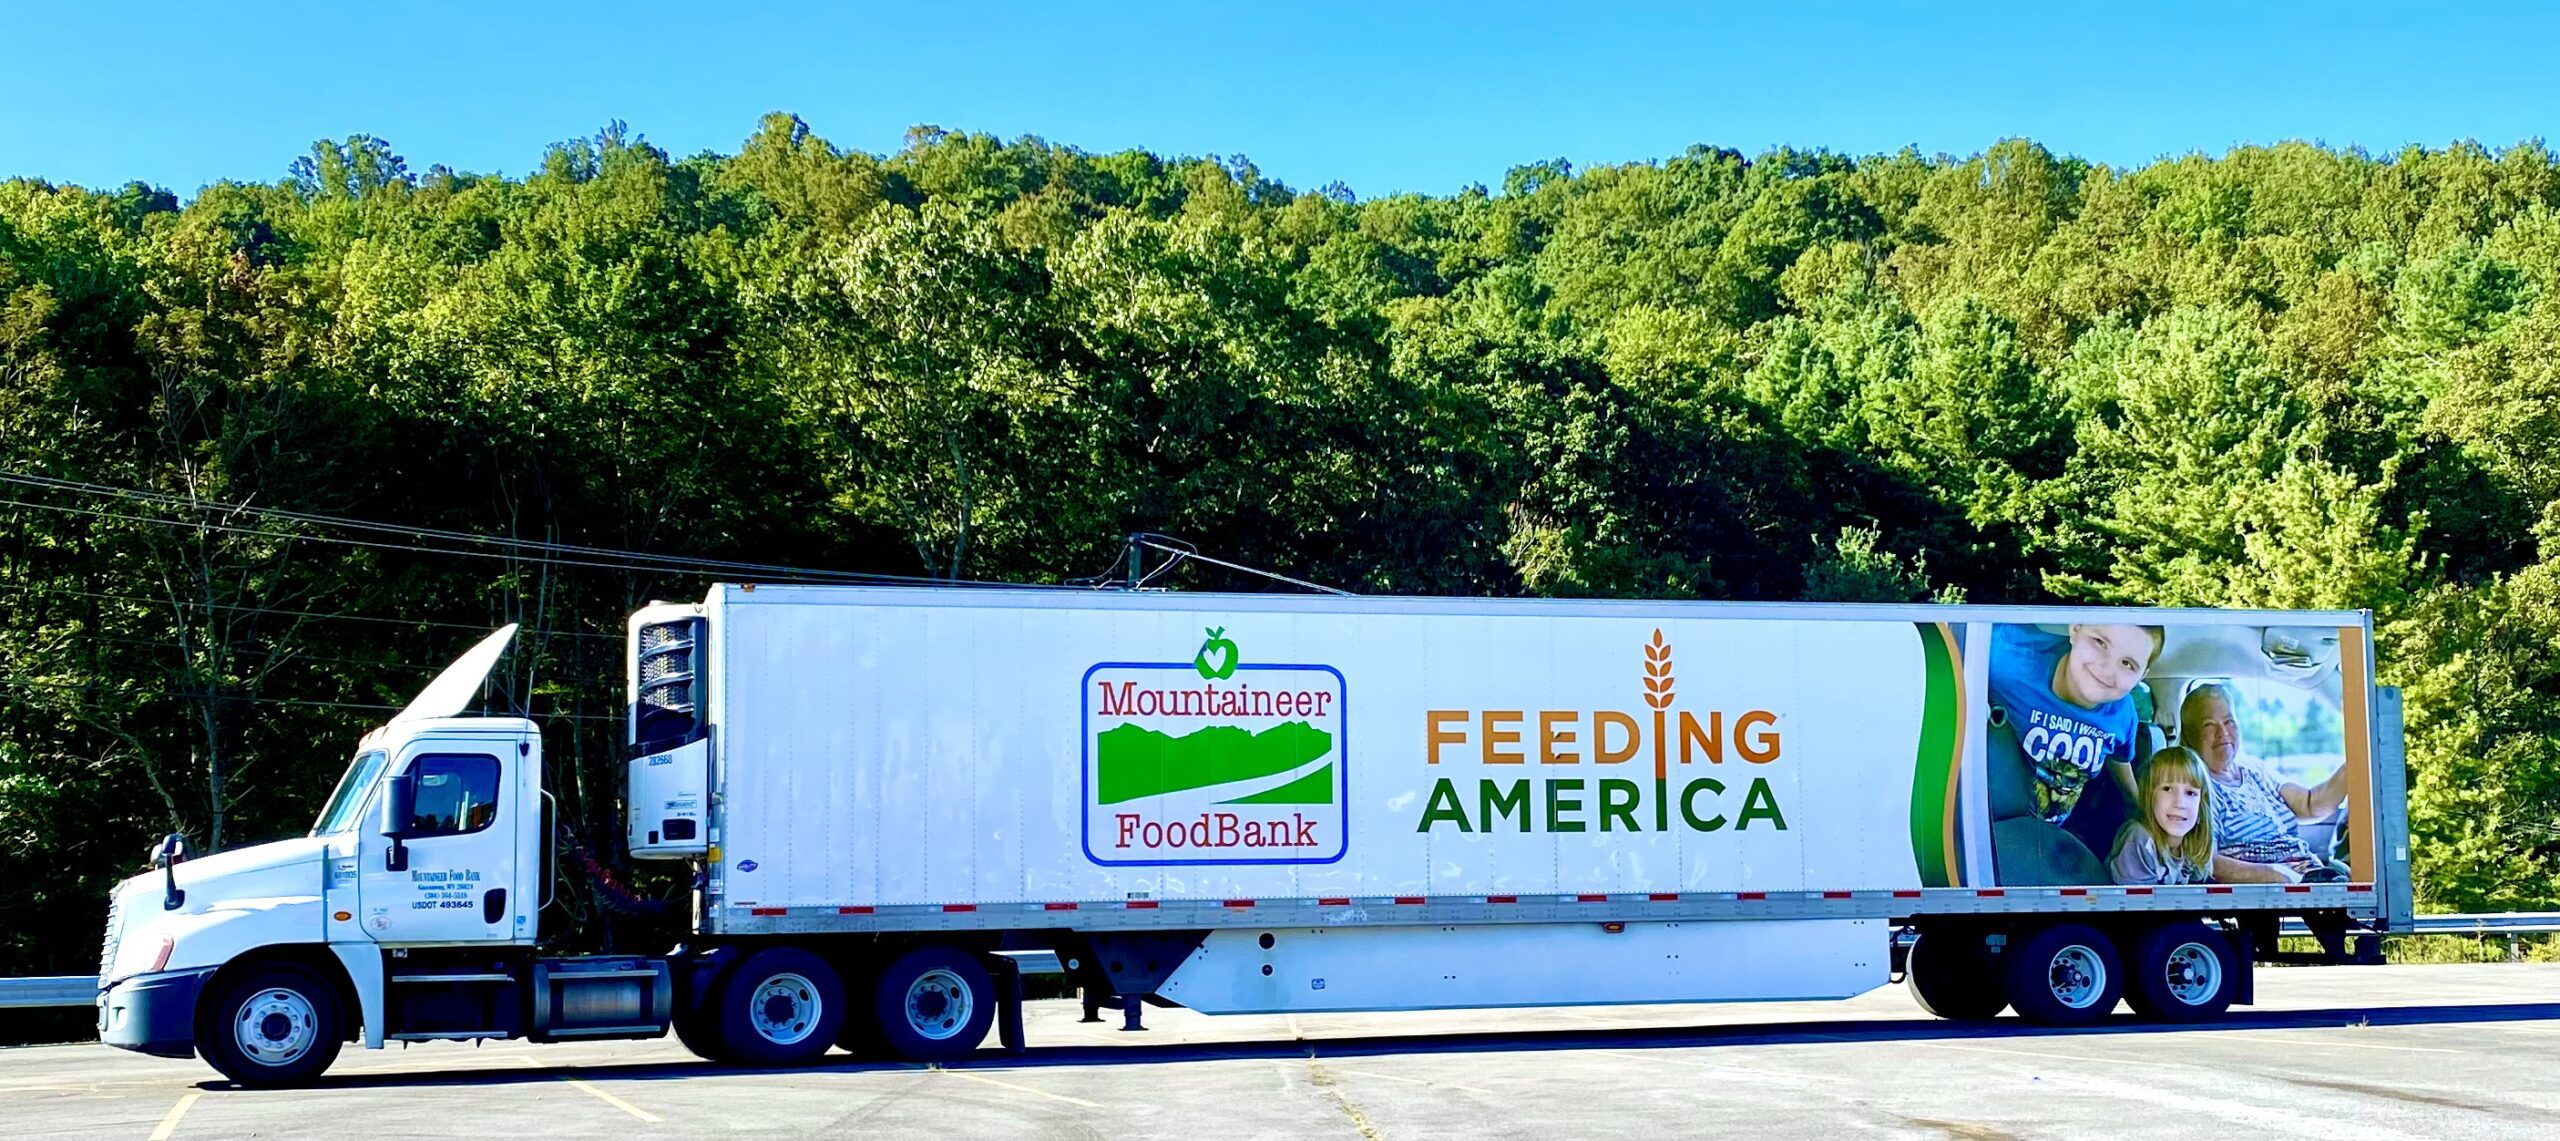 Mountaineer Food Bank Mobile Food Pantry schedule announced